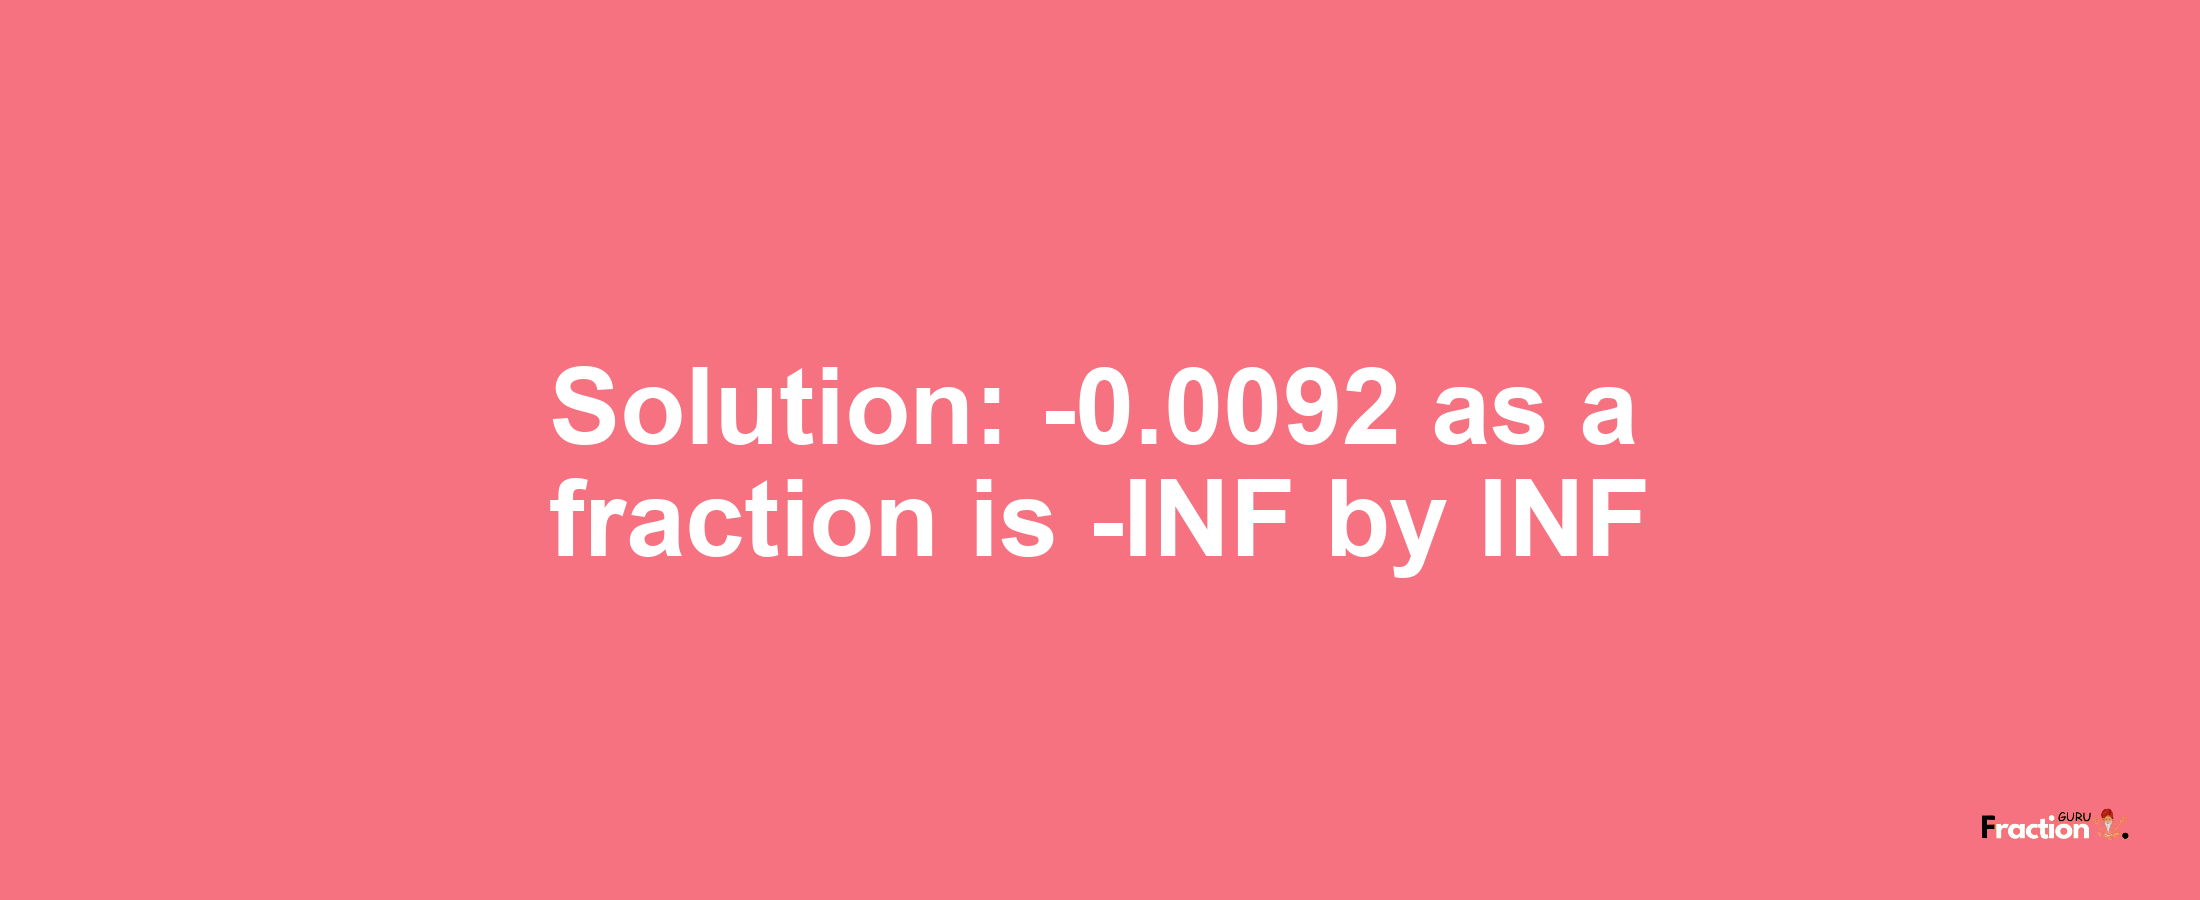 Solution:-0.0092 as a fraction is -INF/INF